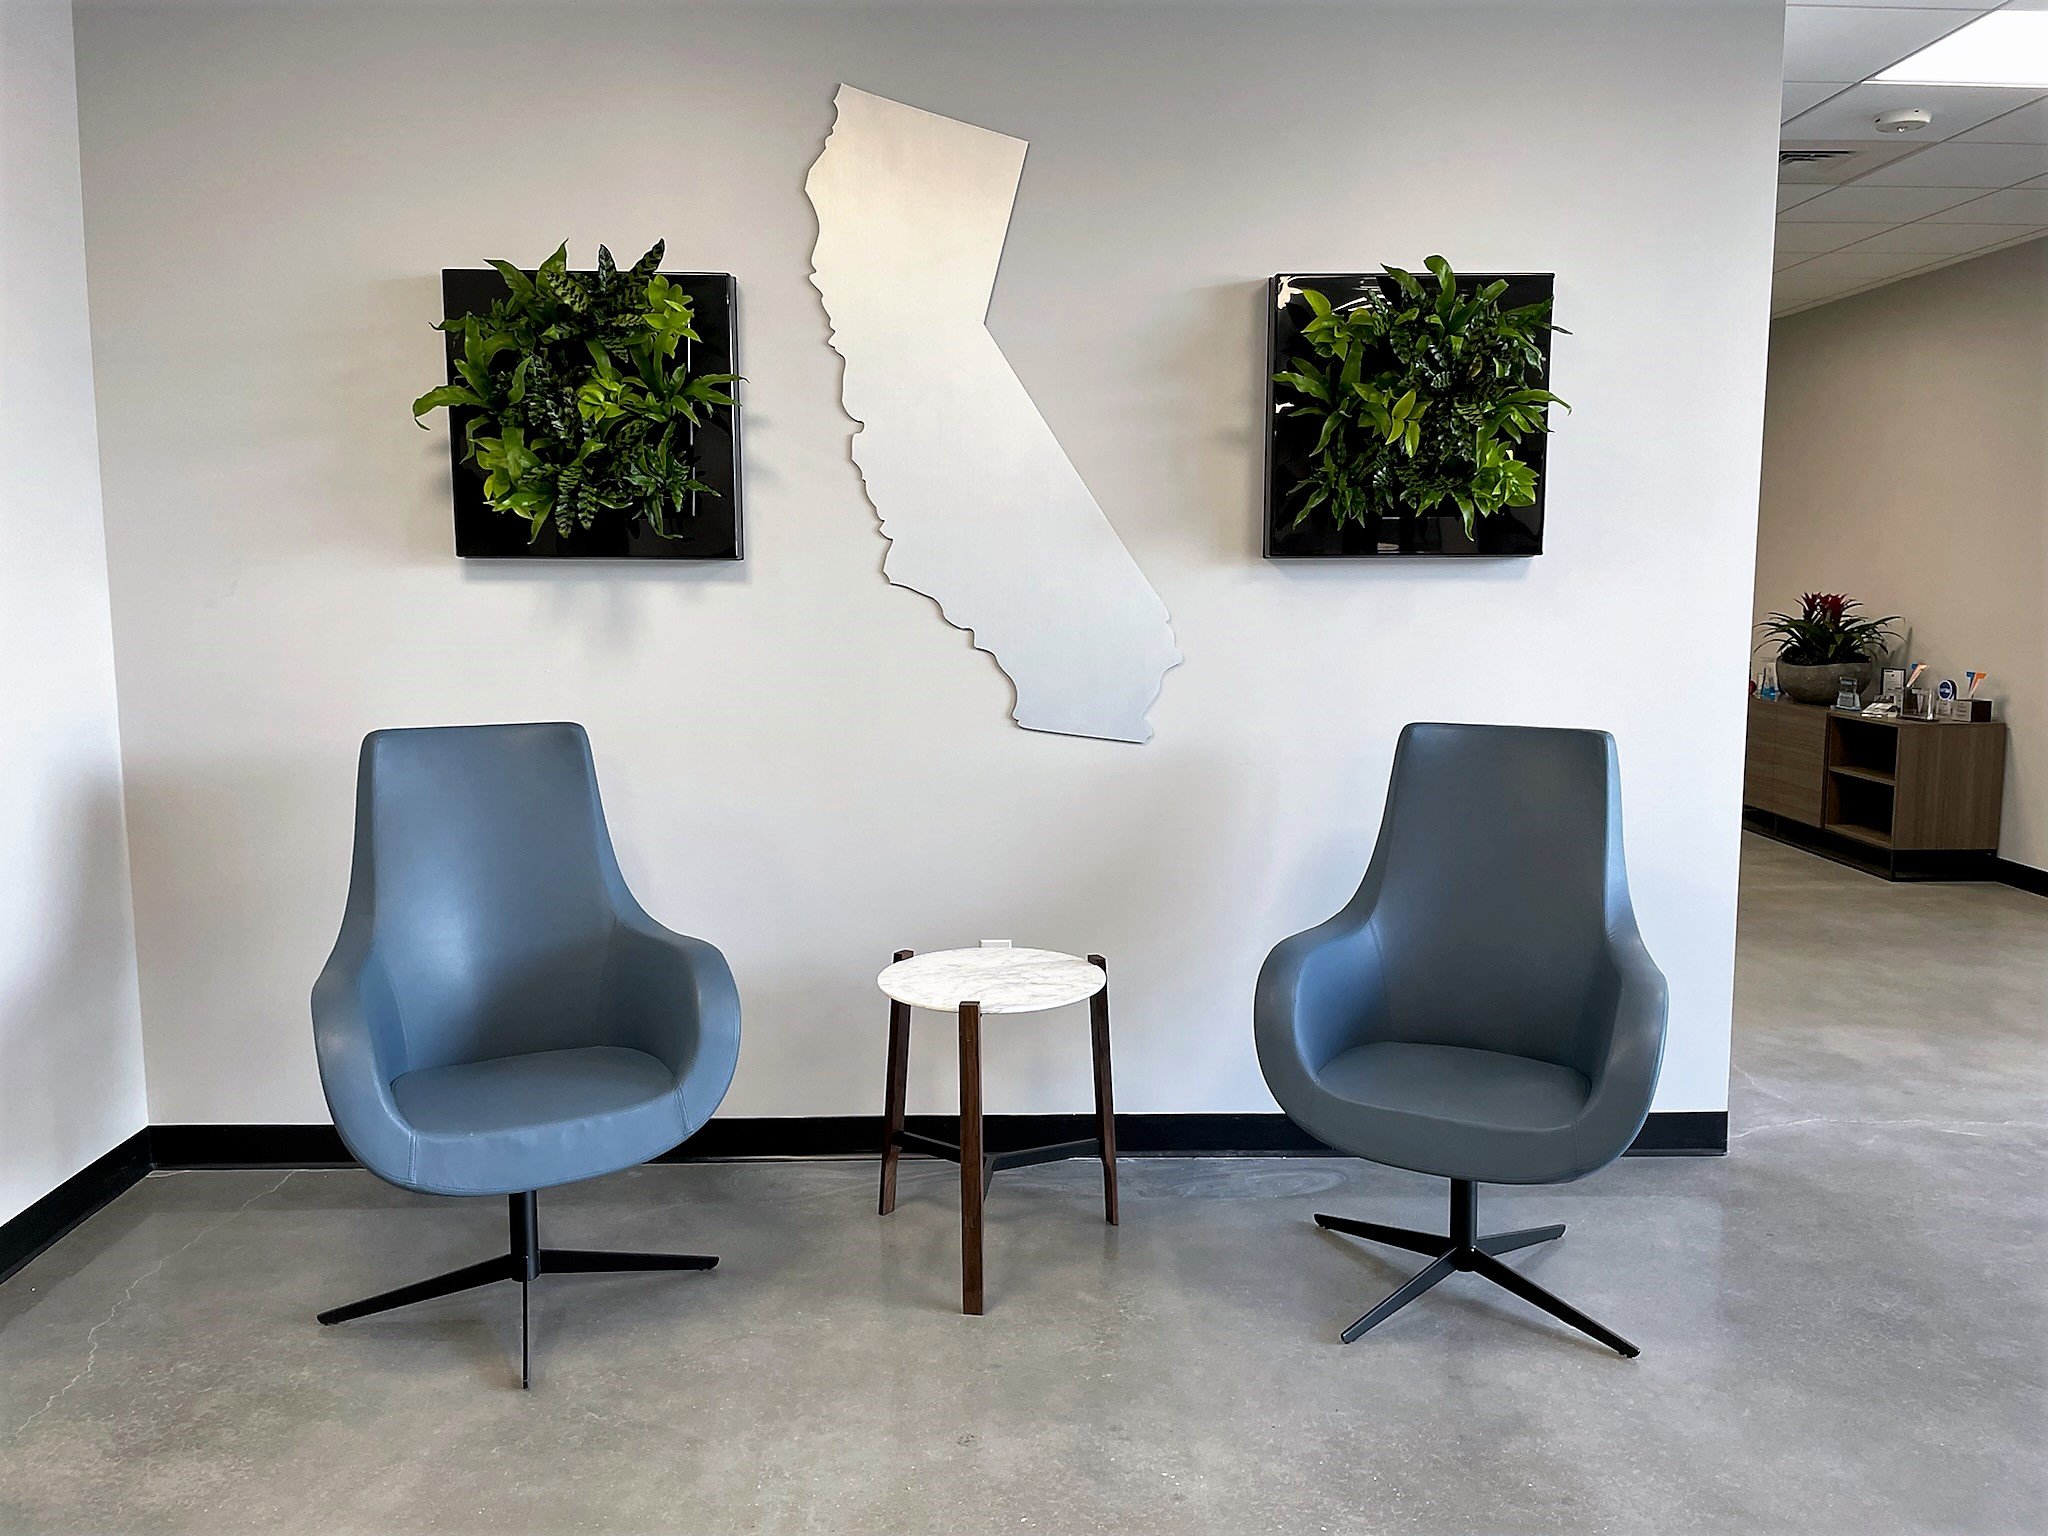 mini walls in lobby chairs and table ca.jpg